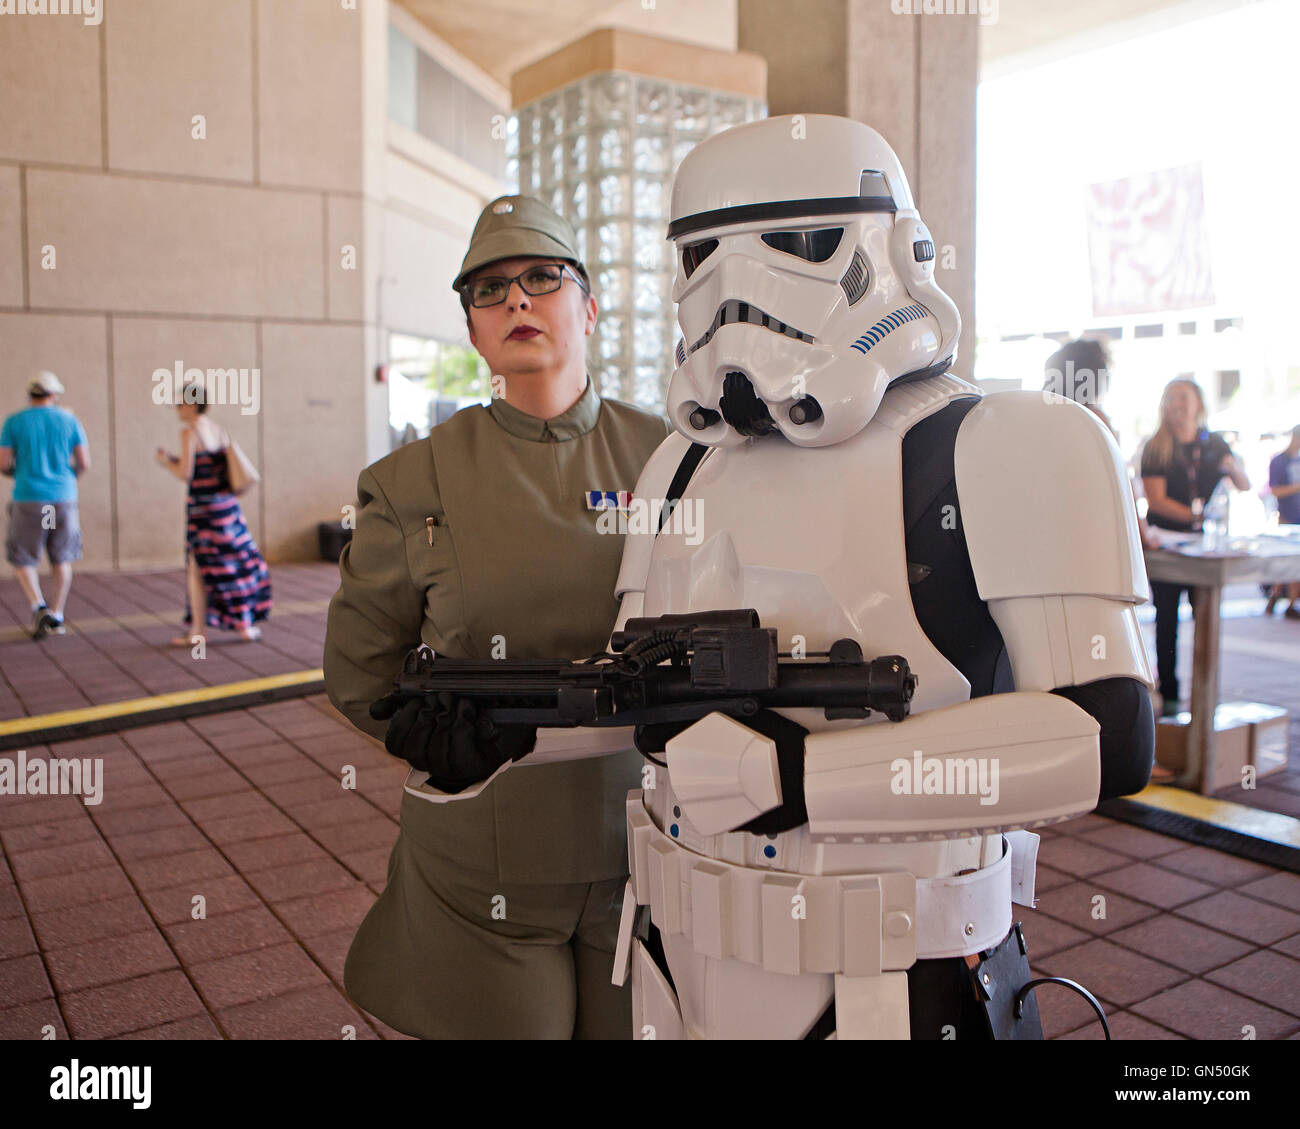 Female Imperial officer and Stormtrooper holding E-11 blaster rifle - USA Stock Photo